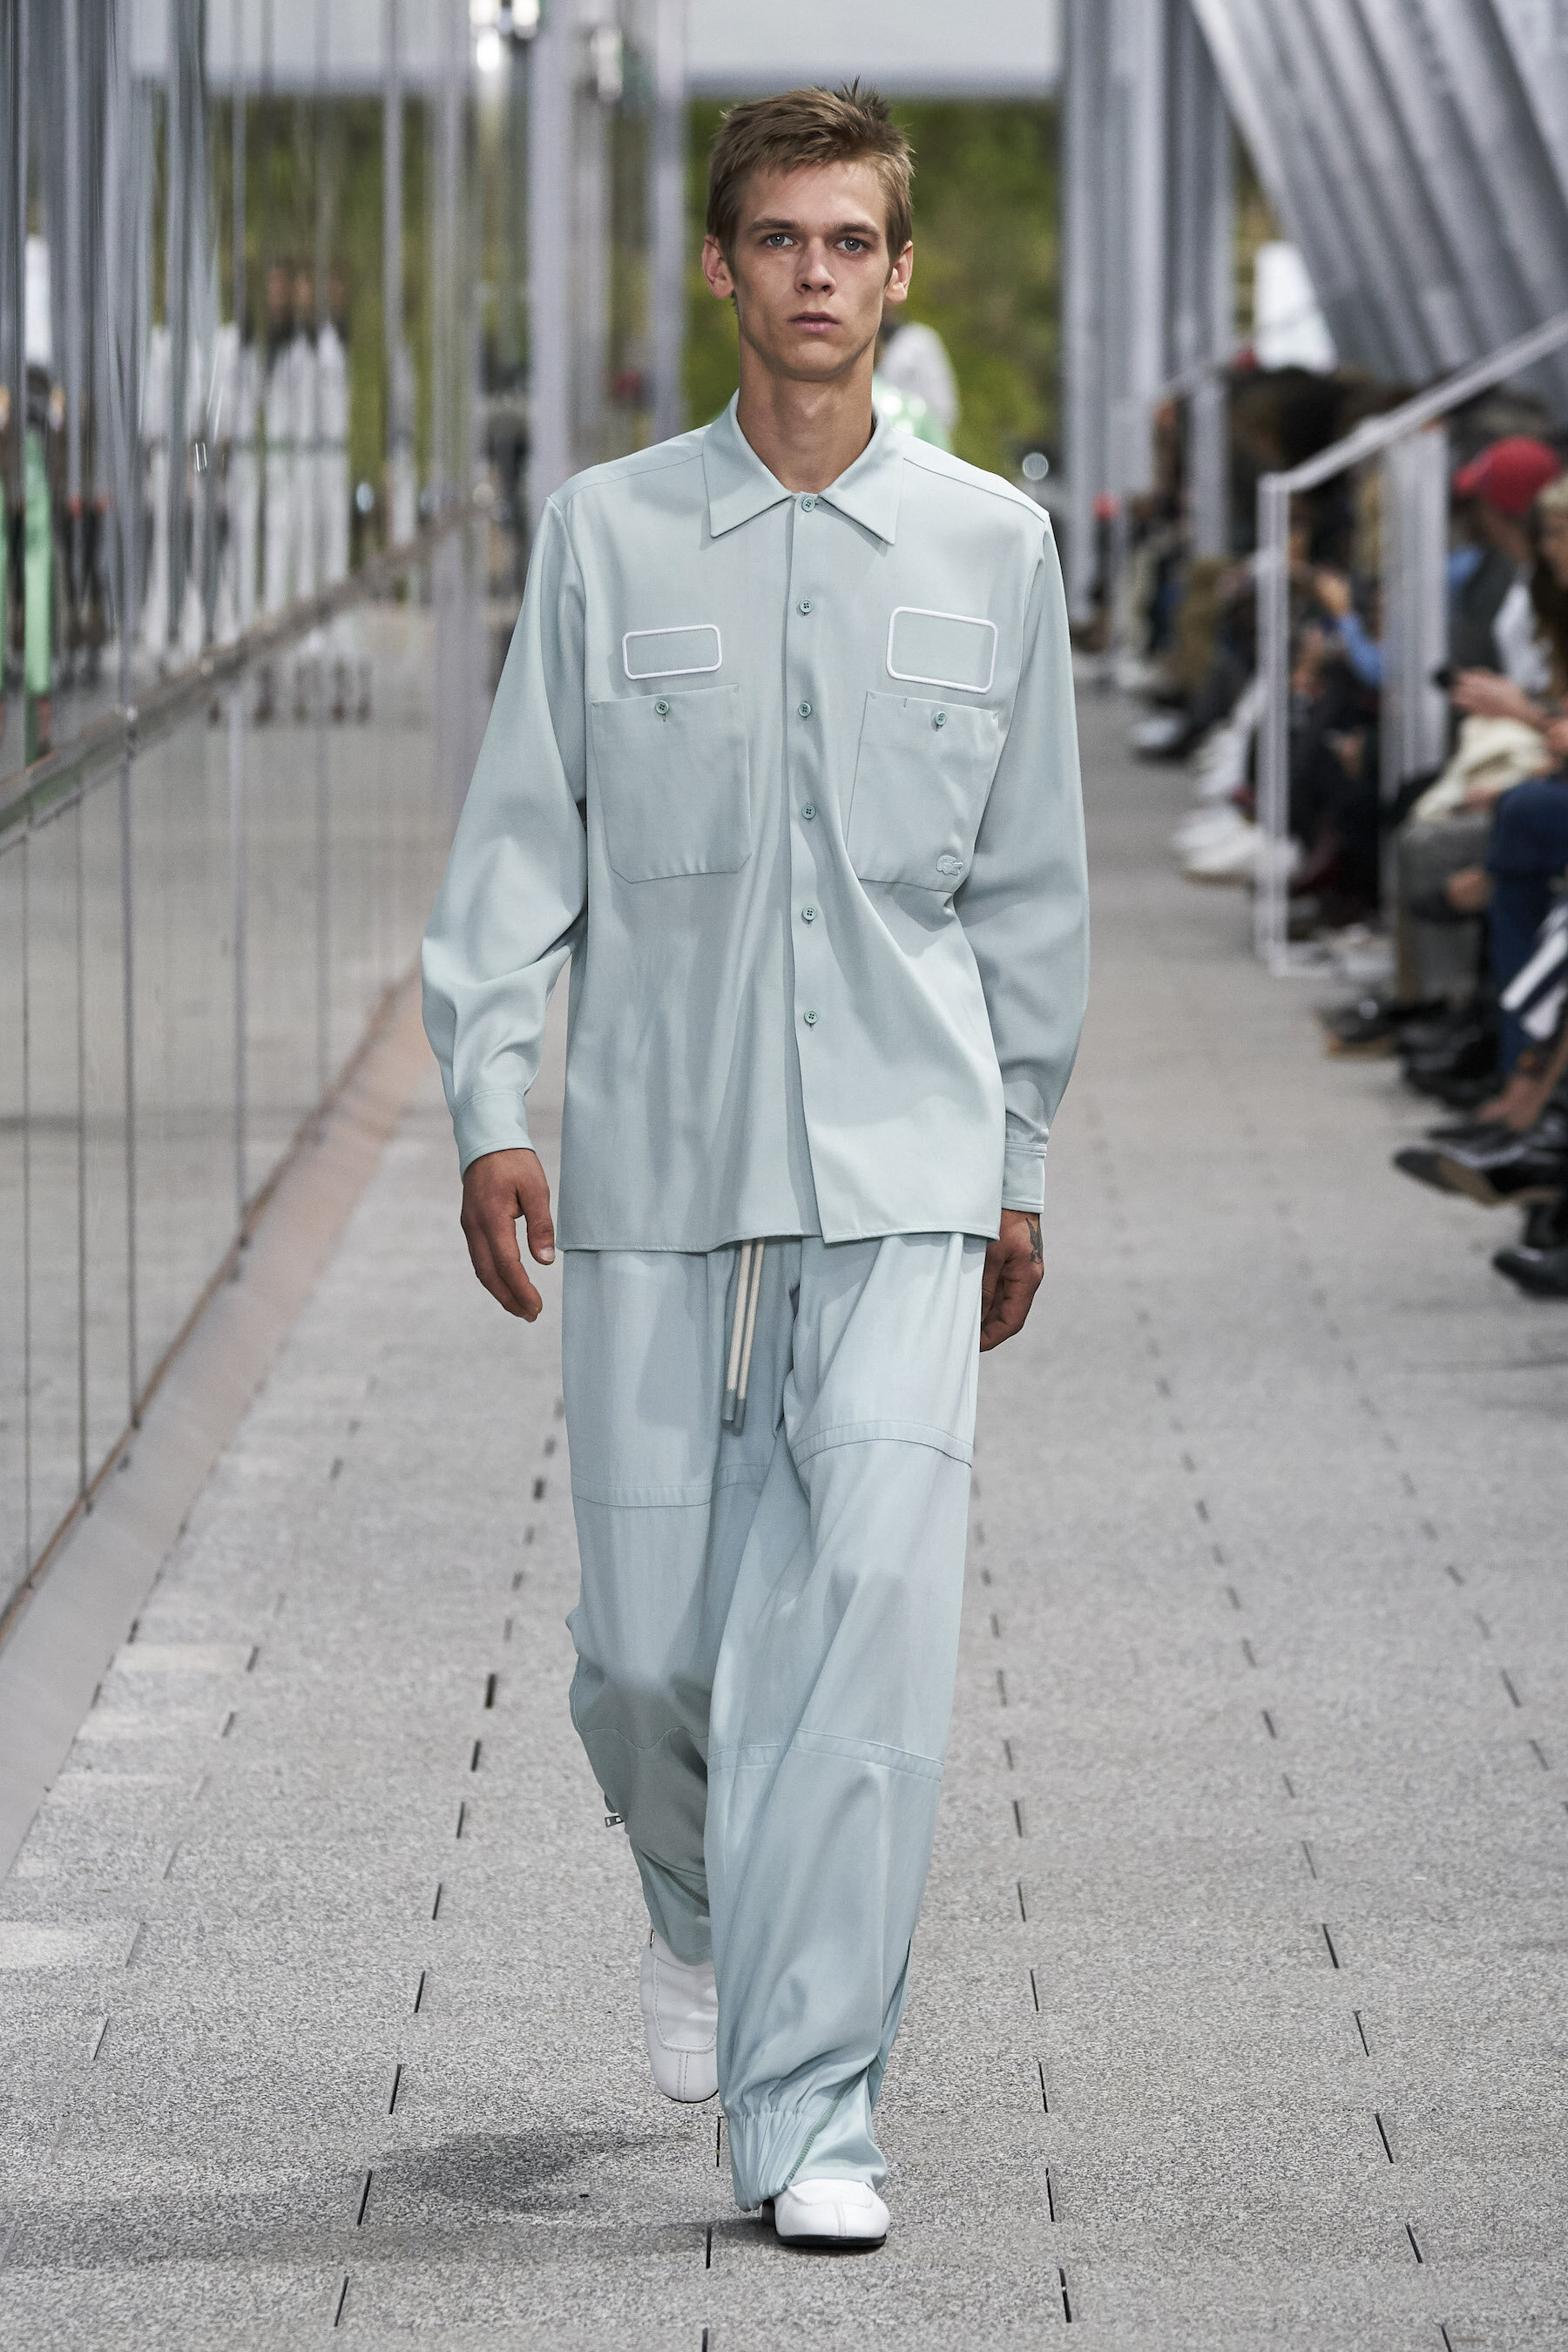 Lacoste SS20_LOOK 37 by Alessandro Lucioni  Imaxtree.com.jpg